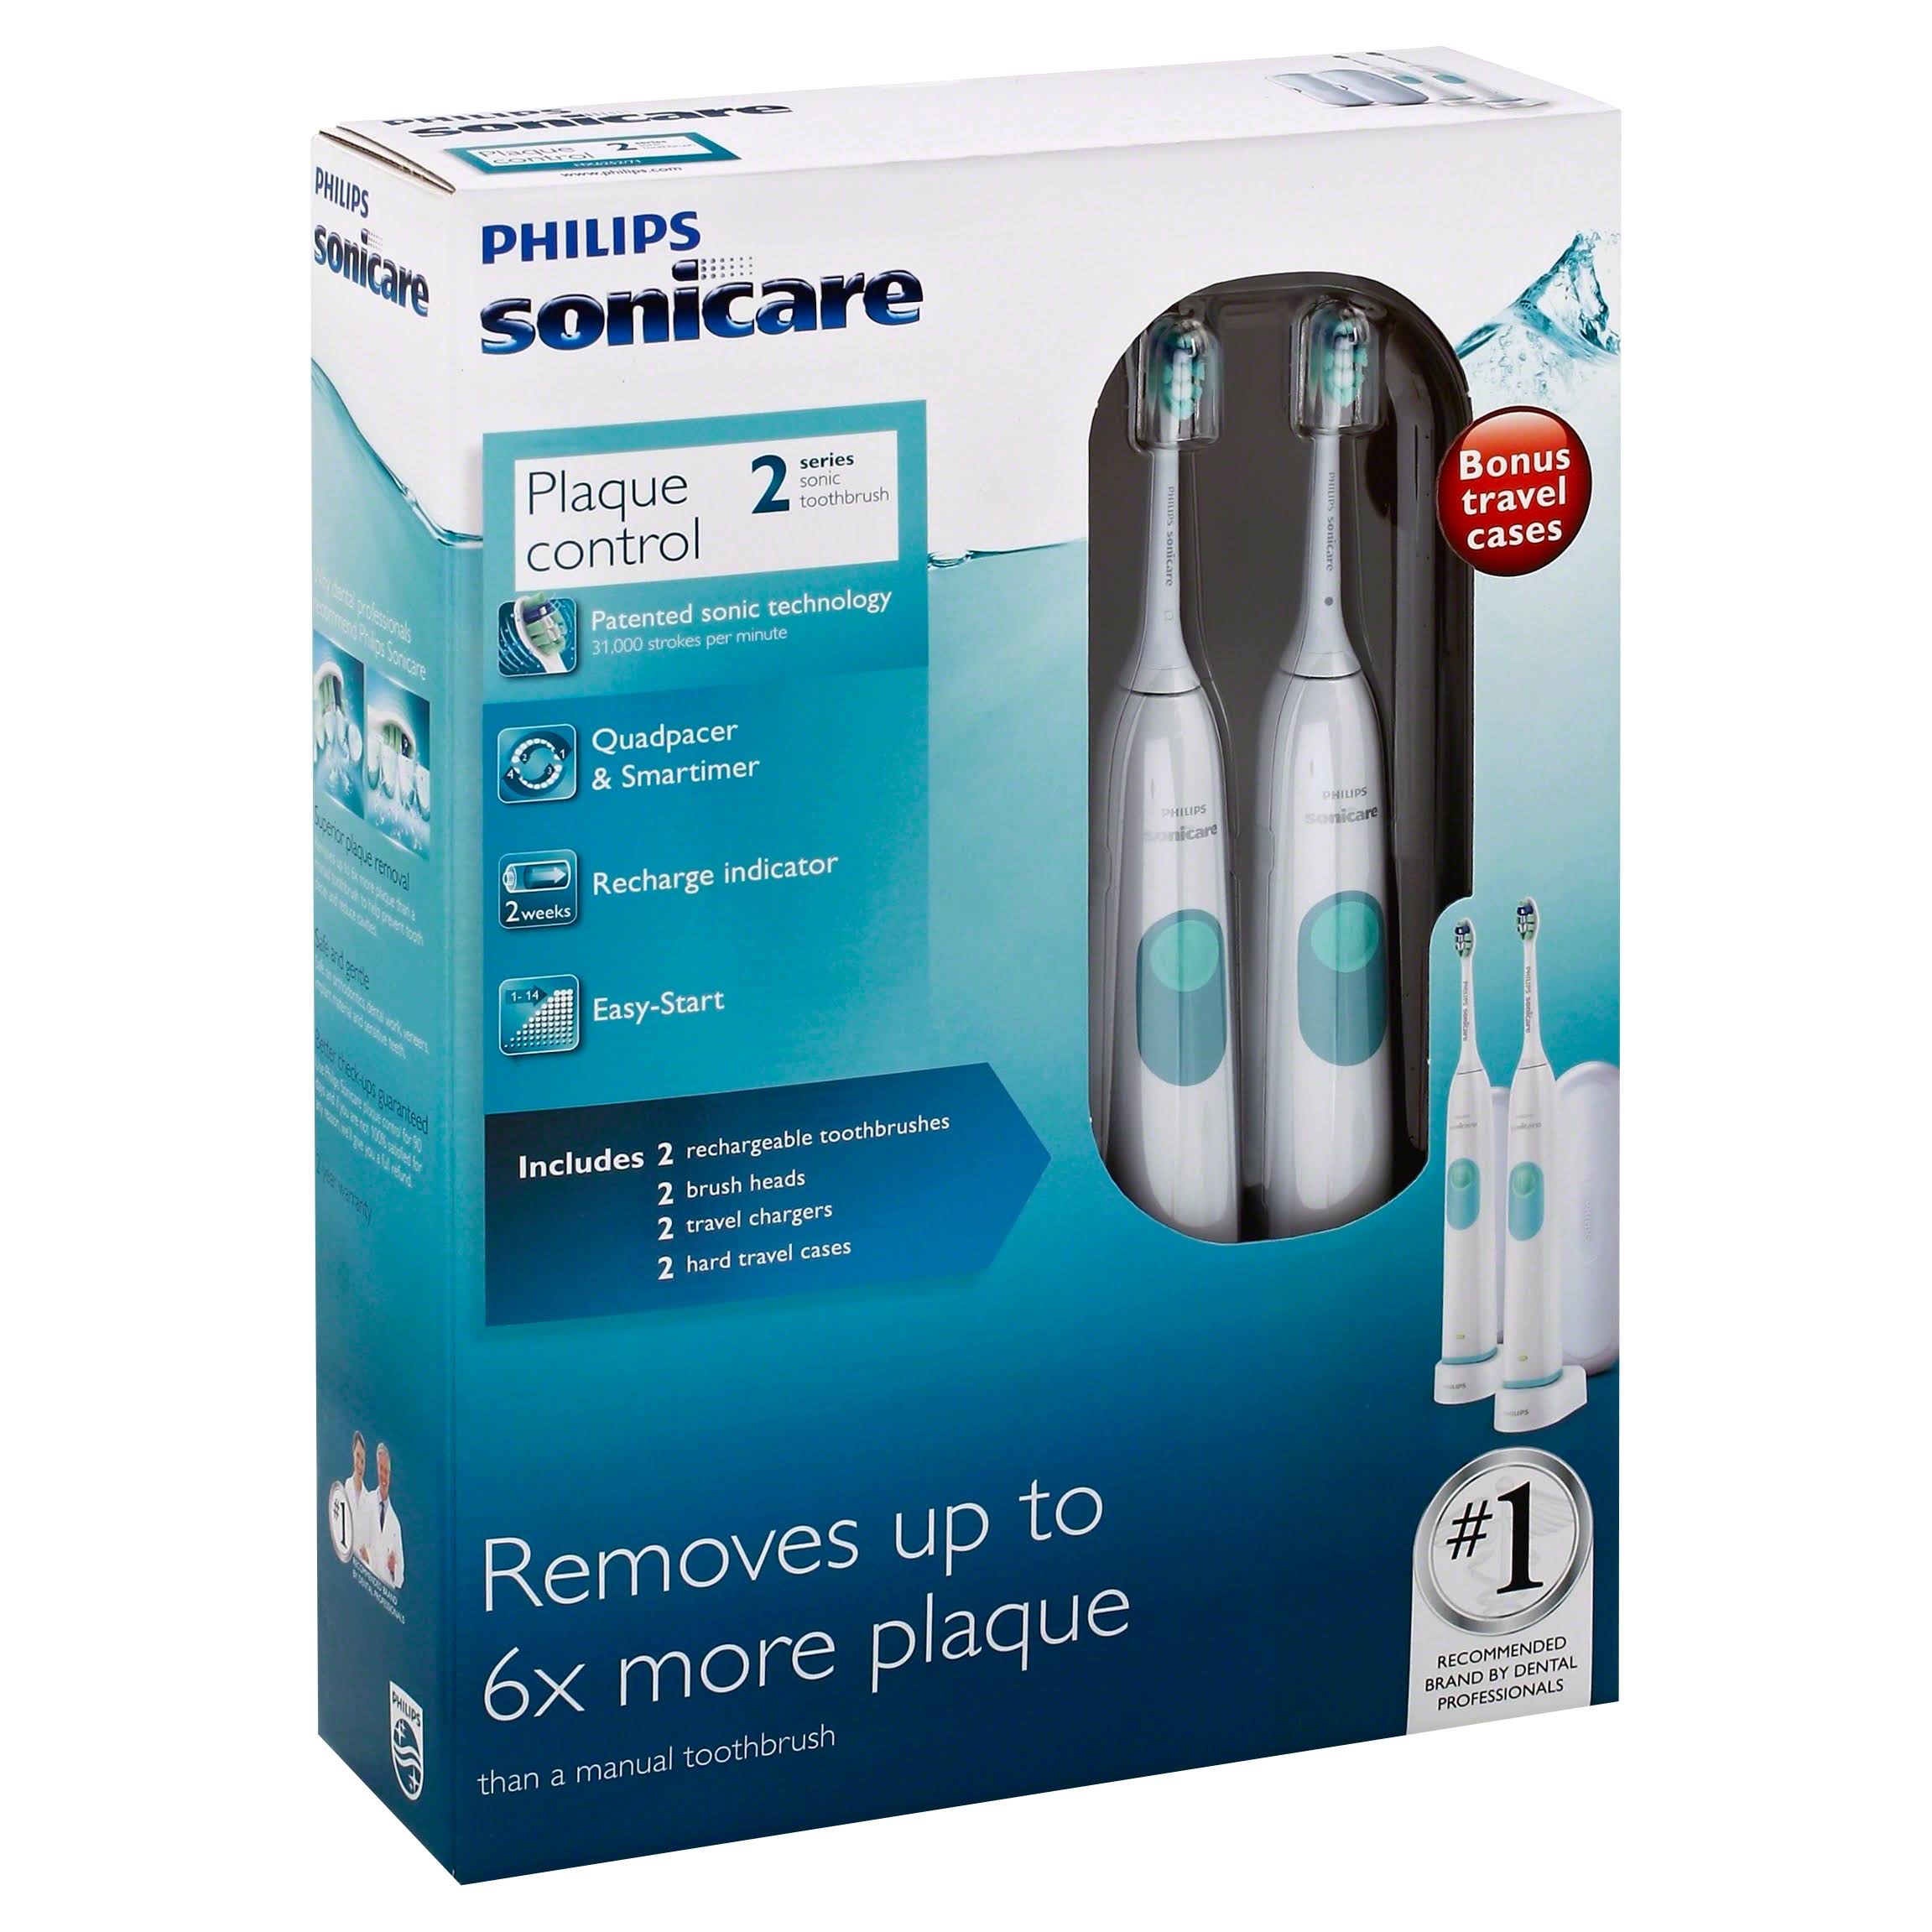 sonicare-toothbrushes-sonic-2-series-plaque-control-hj-2-s